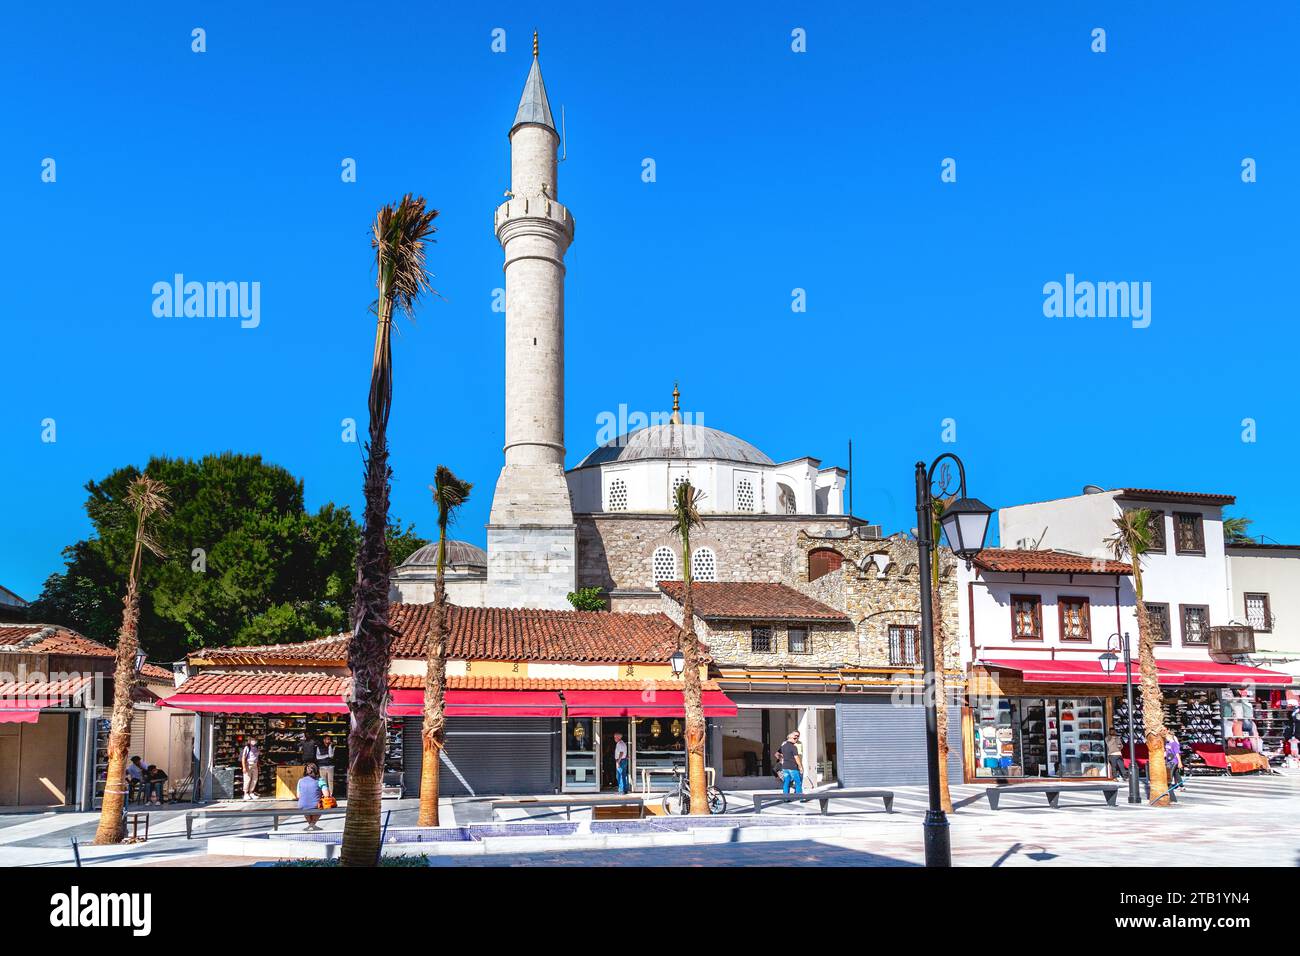 KUSADASI, TURKEY - JUNE 2, 2021: This is the Kaleici mosque (17th century) in the center of the modern resort town. Stock Photo